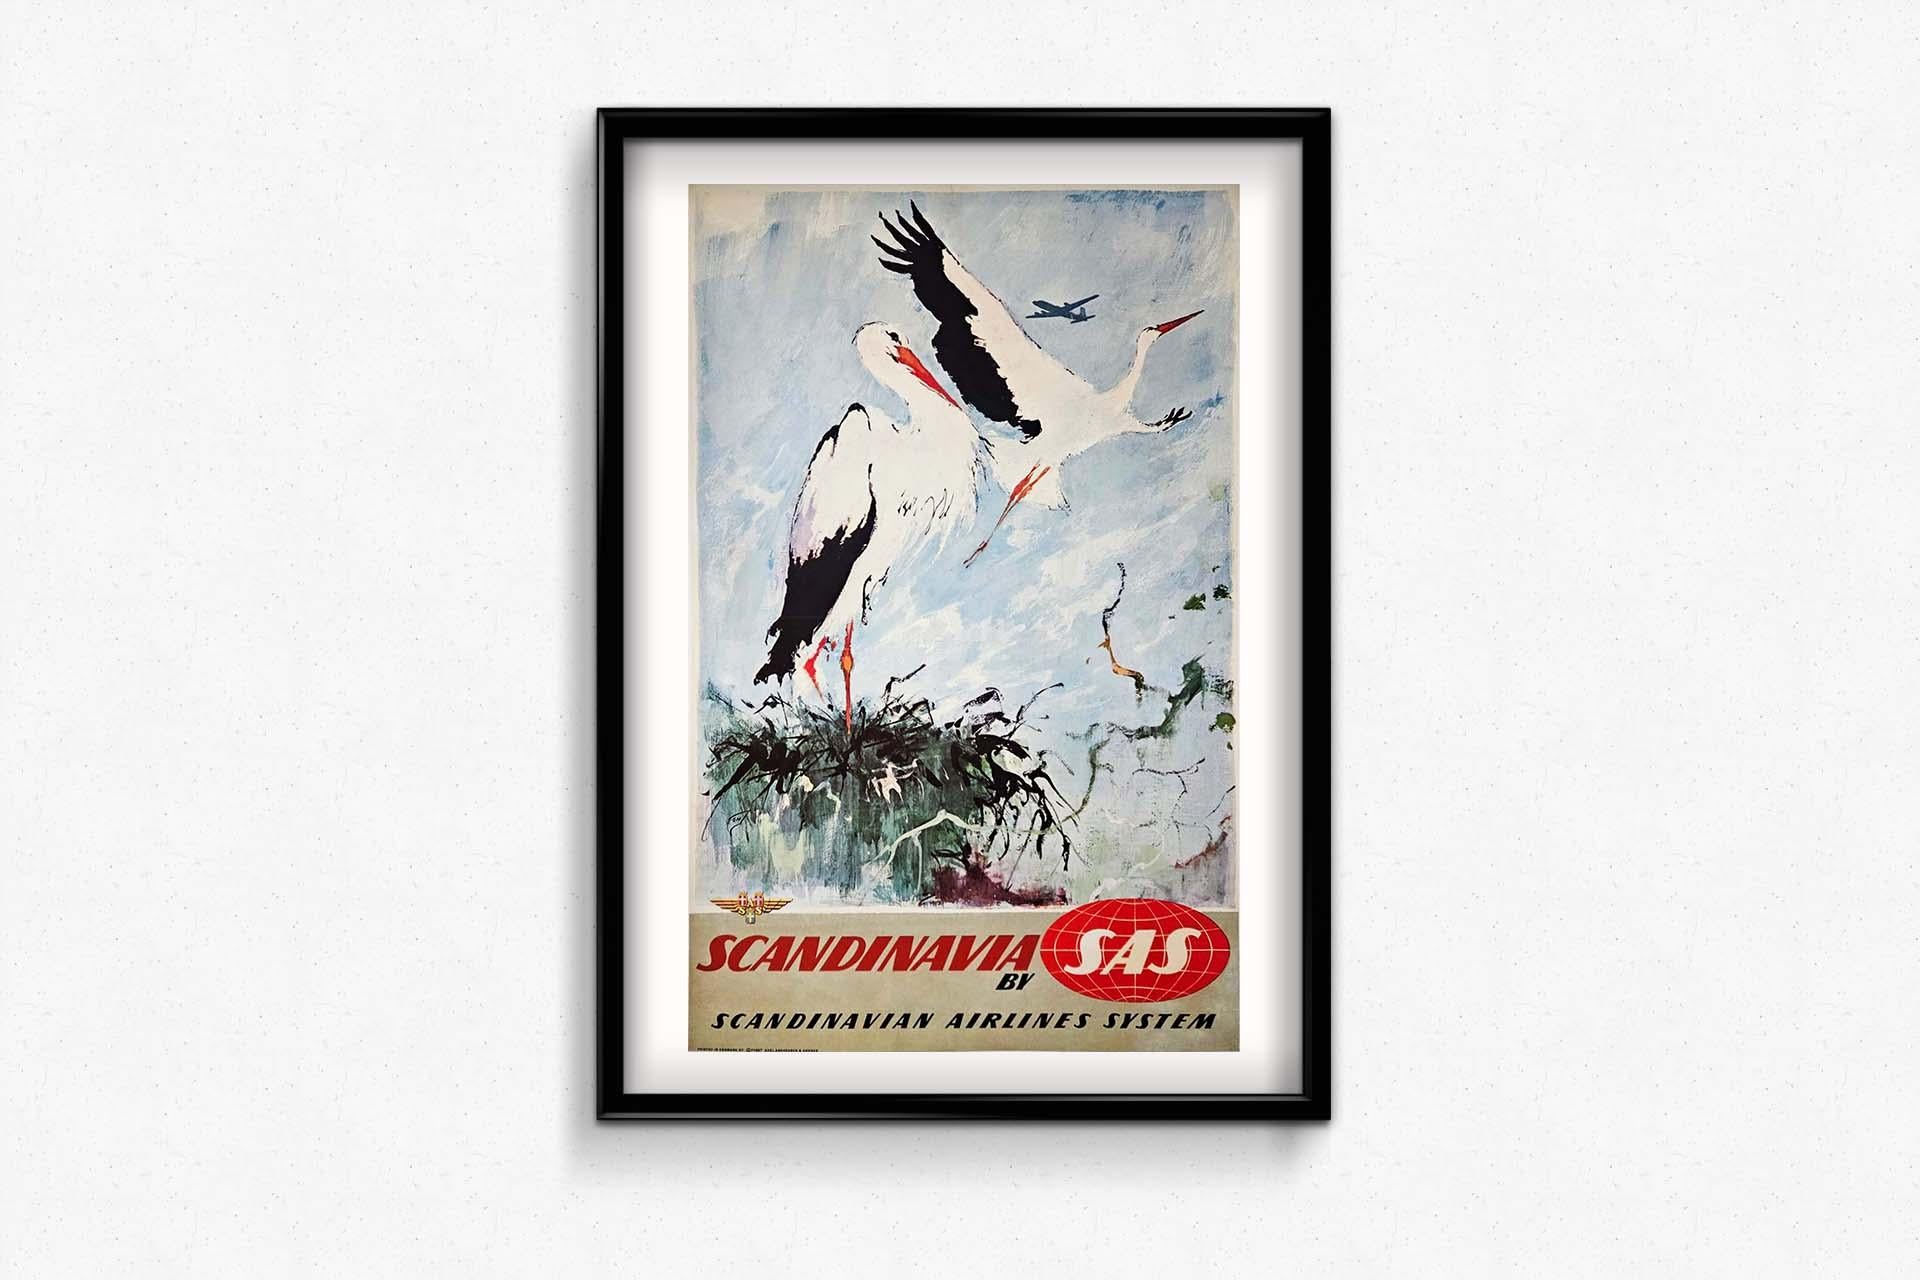 Original poster by Otto Nielsen for SAS (Scandinavian Airlines System)
Otto Nielsen (1916-2000) was an accomplished painter who devoted much of his career to studying the people and animals of different regions. He illustrated numerous travel books